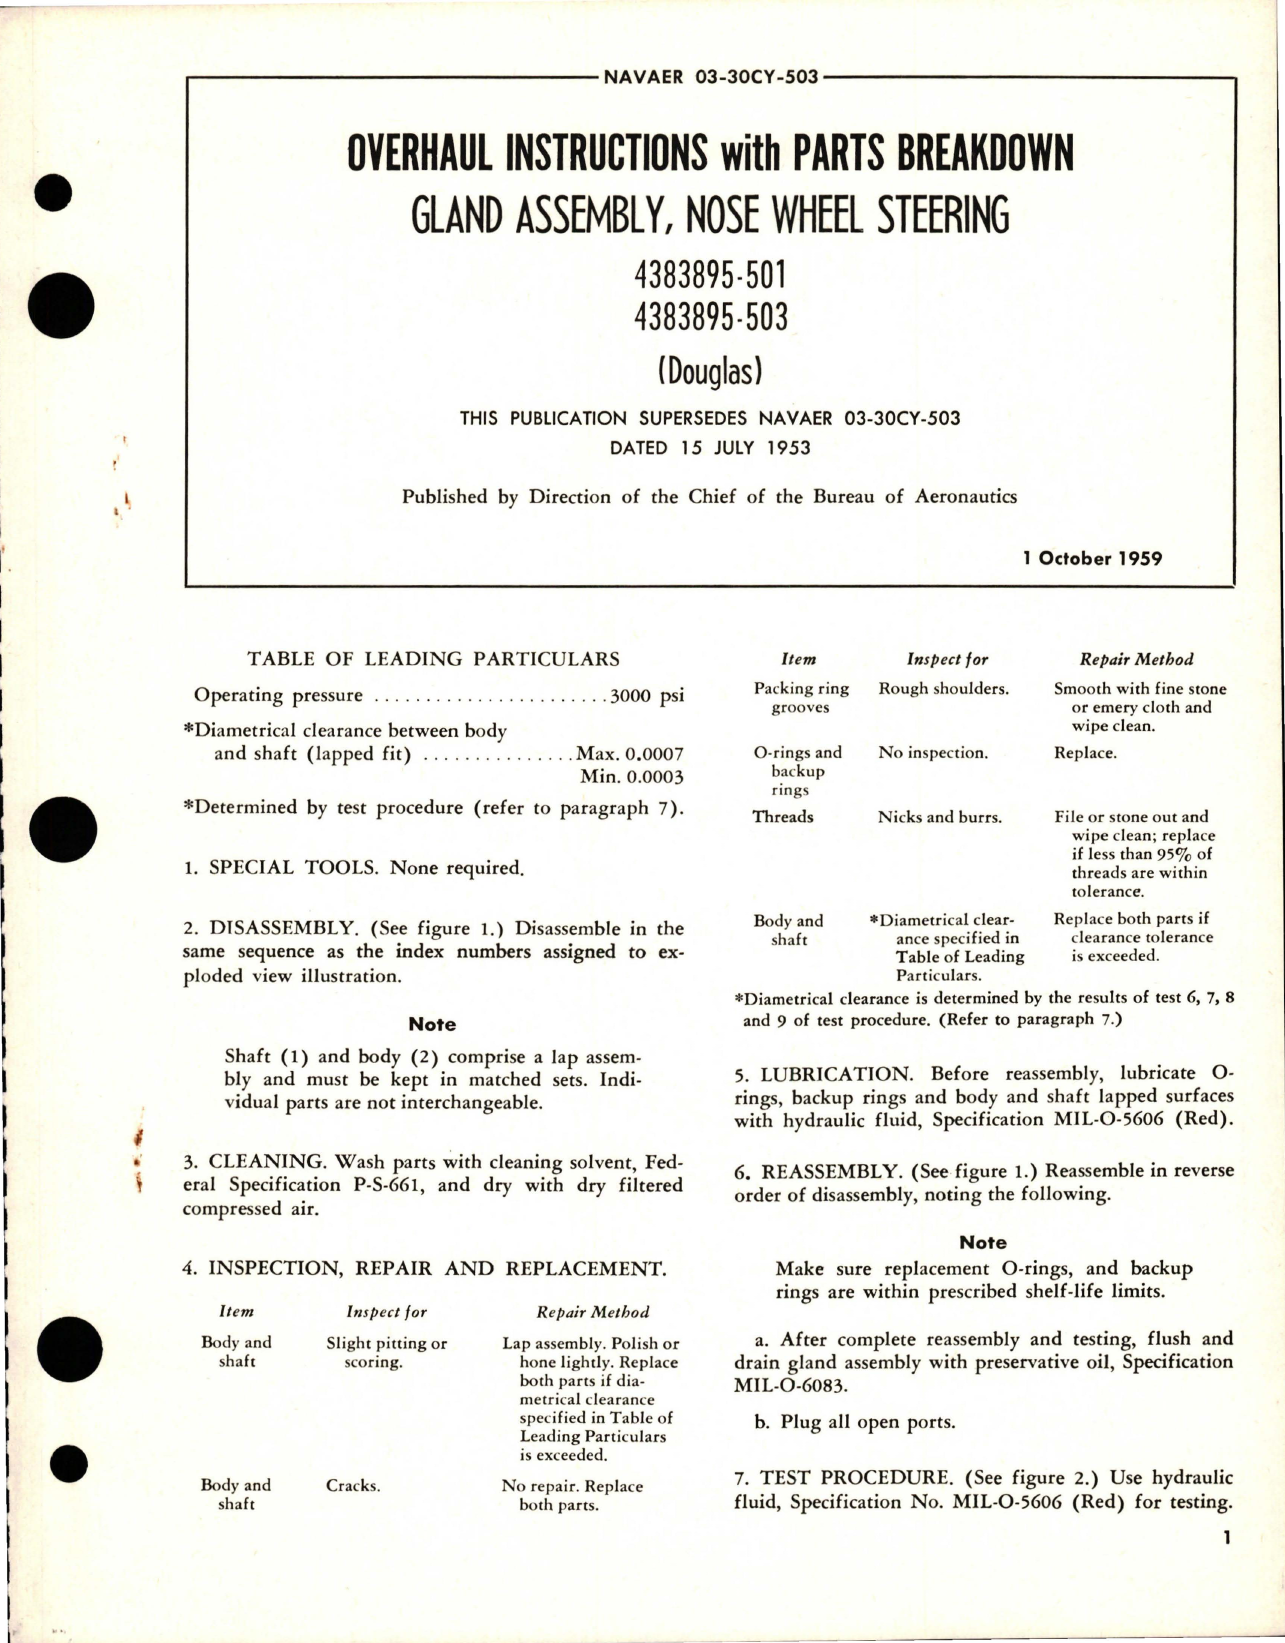 Sample page 1 from AirCorps Library document: Overhaul Instructions with Parts for Nose Wheel Steering Glad Assembly - 4383895-501 and 4383895-503